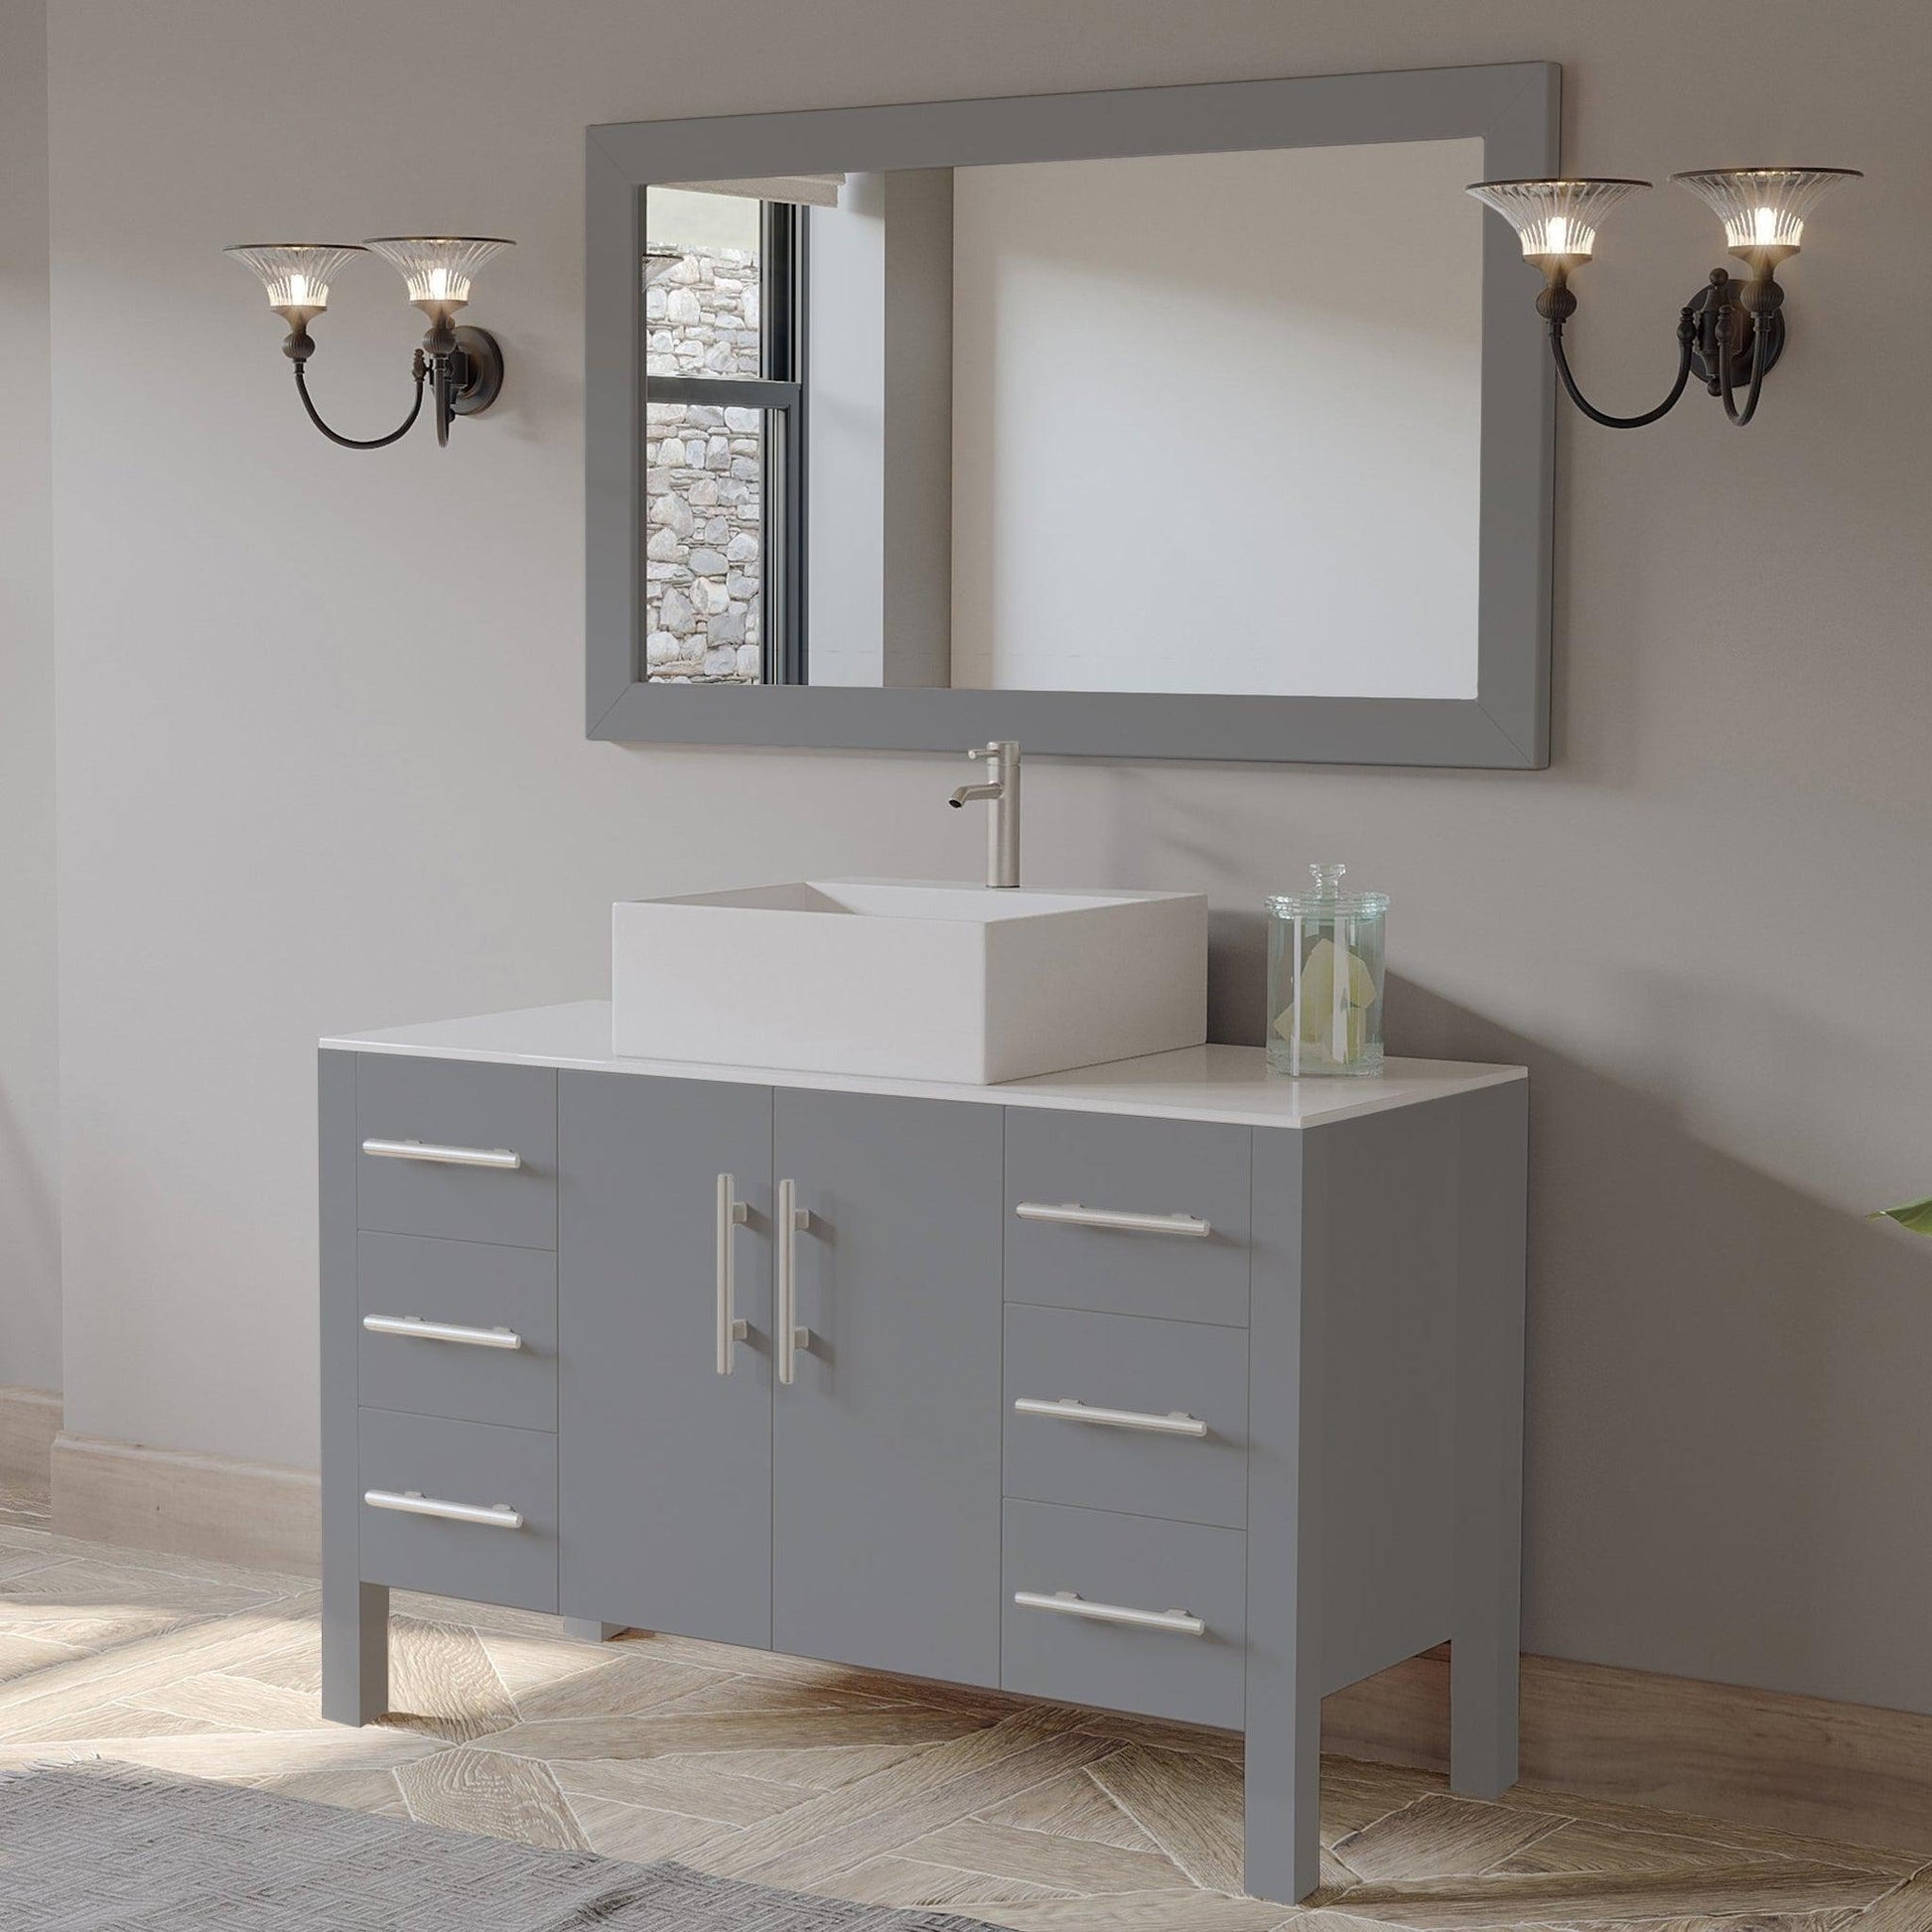 Cambridge Plumbing 48" Gray Wood Single Vanity Set With Porcelain Countertop And Square Vessel Sink With Faucet Hole And Brushed Nickel Plumbing Finish